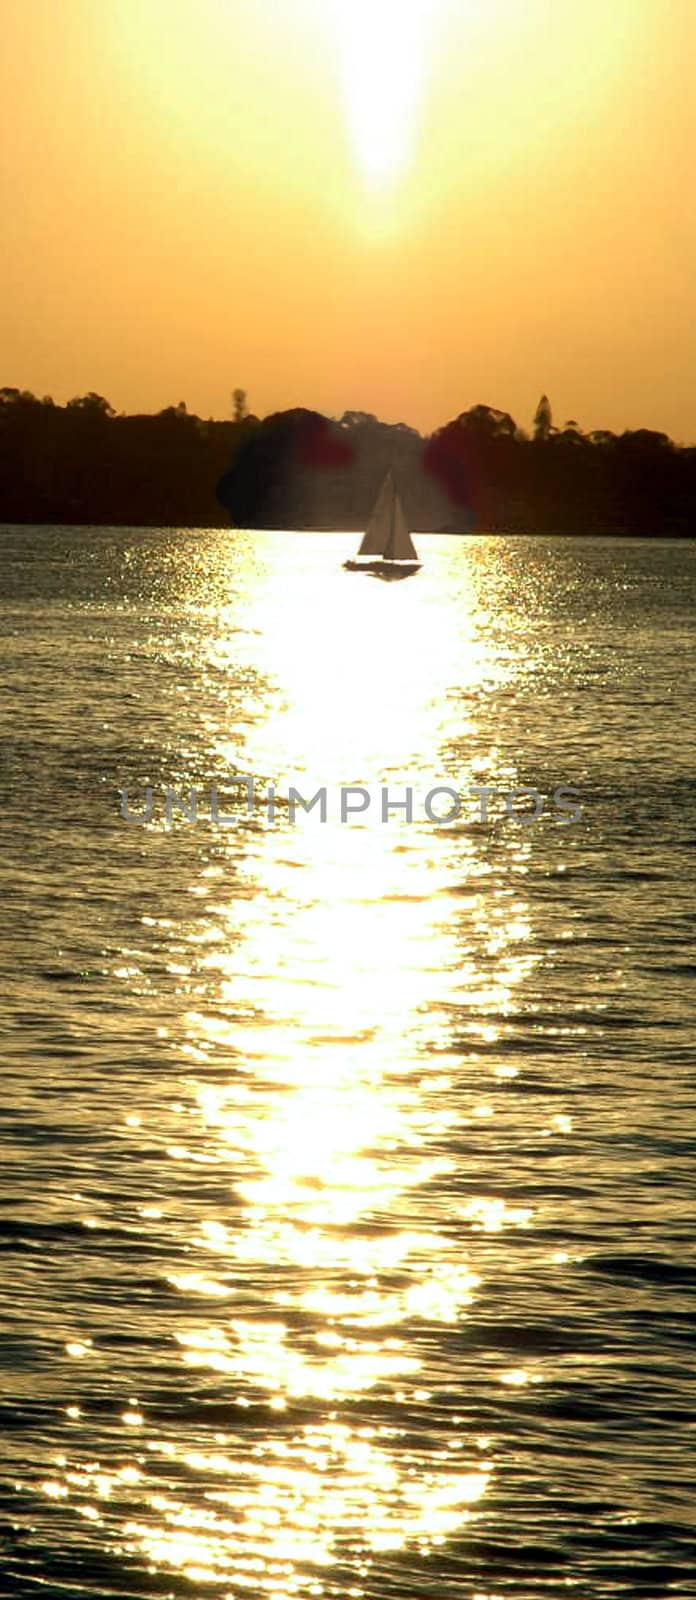 vertical photo of a small boat, sun reflection